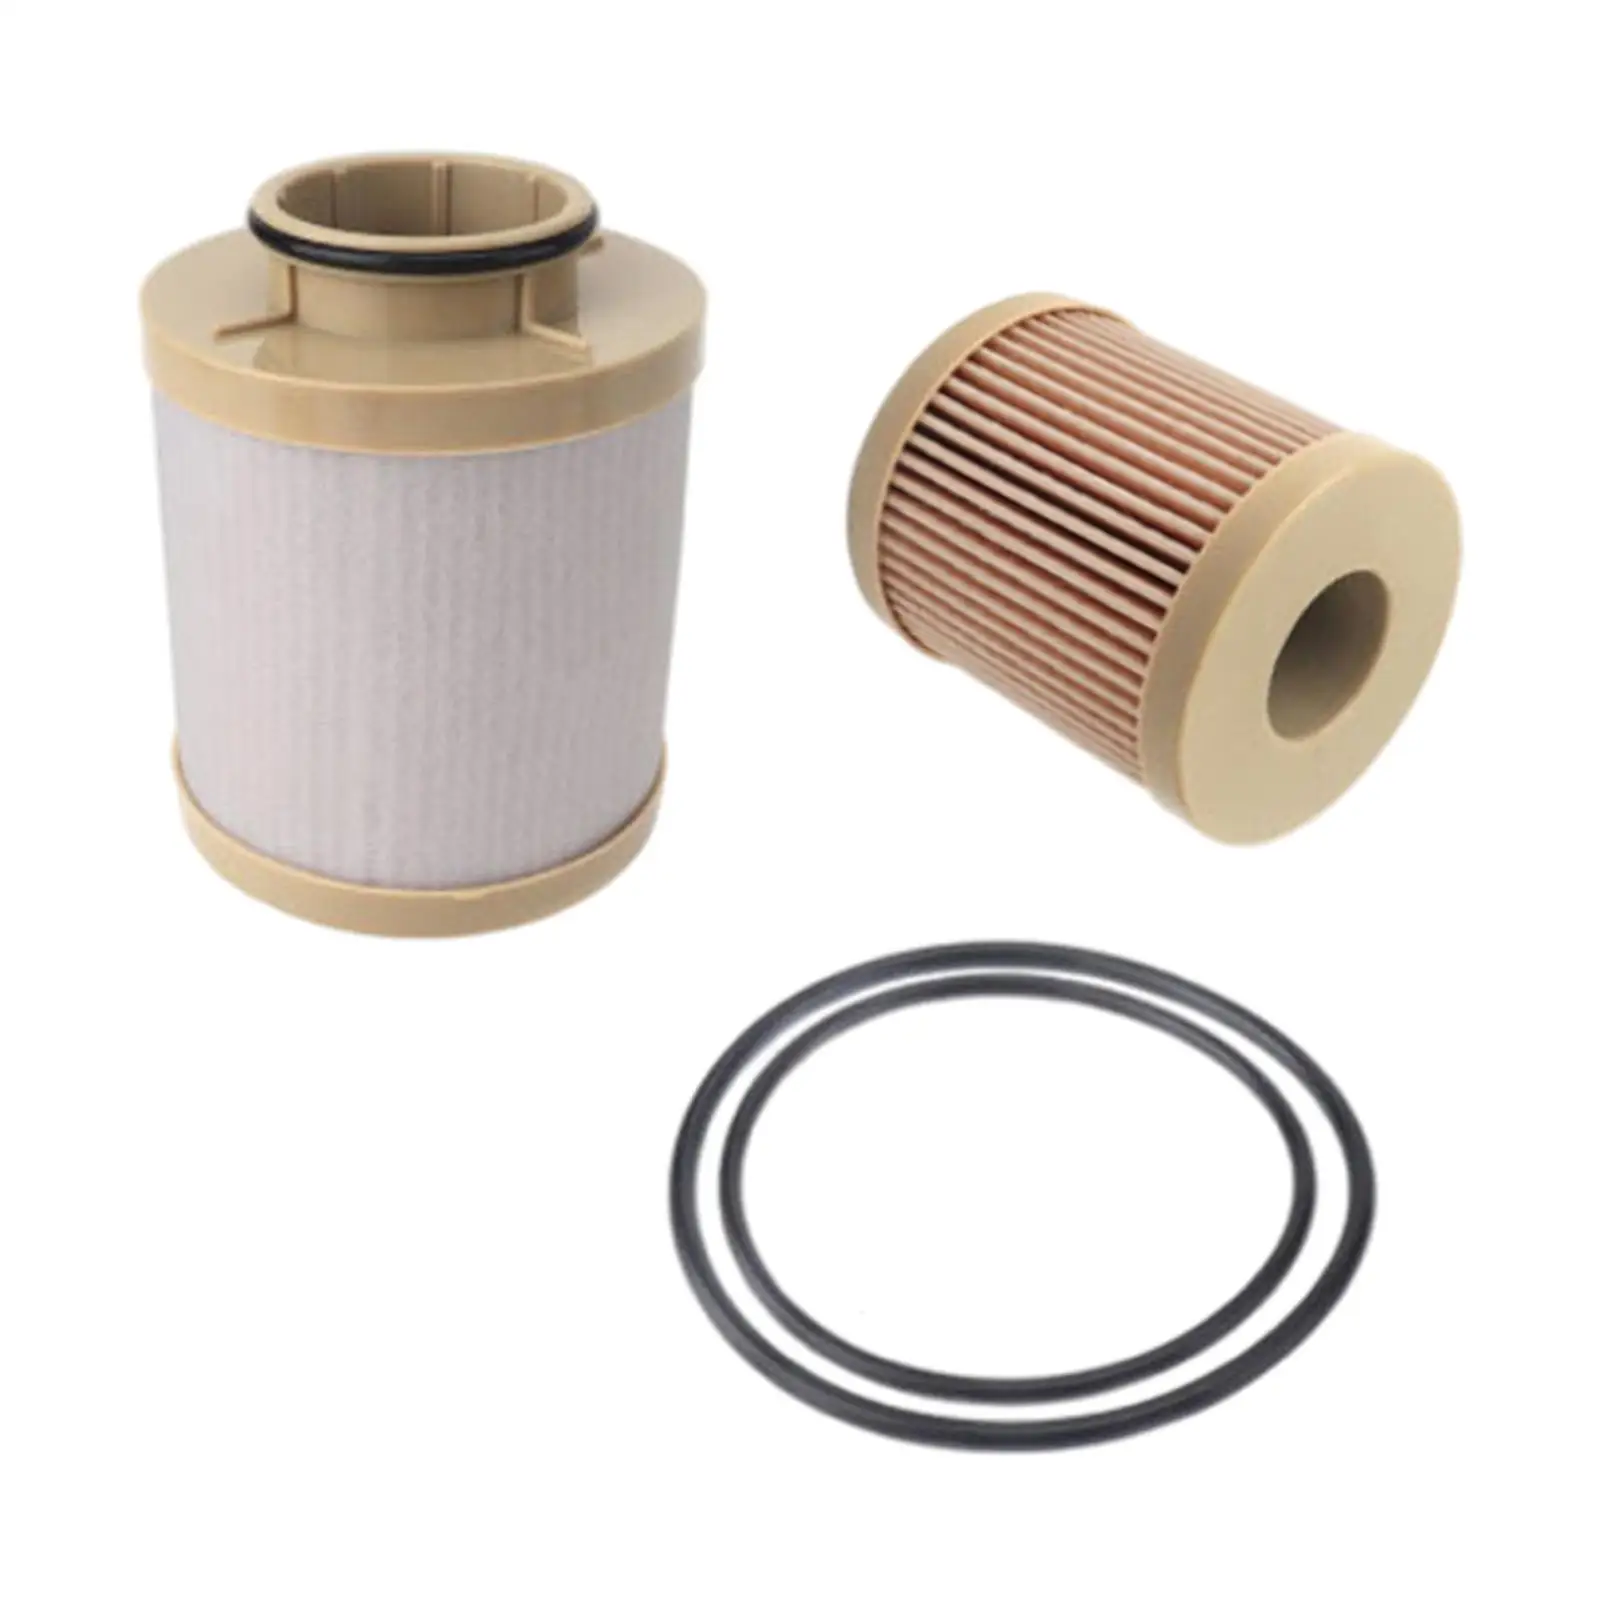 Fuel Filters  for  f550?? Truck 2008-2010  Replacement